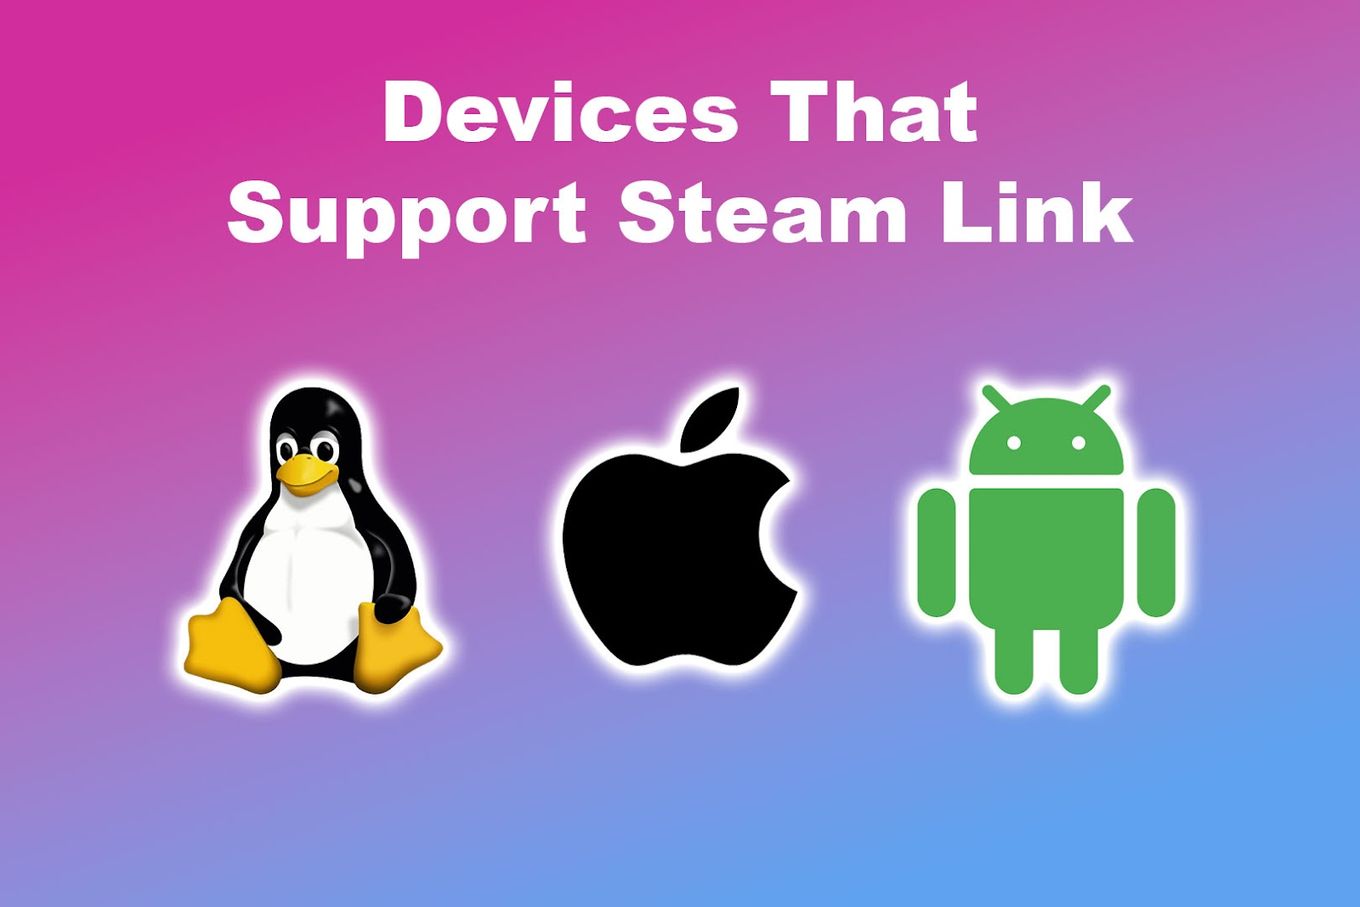 Devices That Support Steam Link